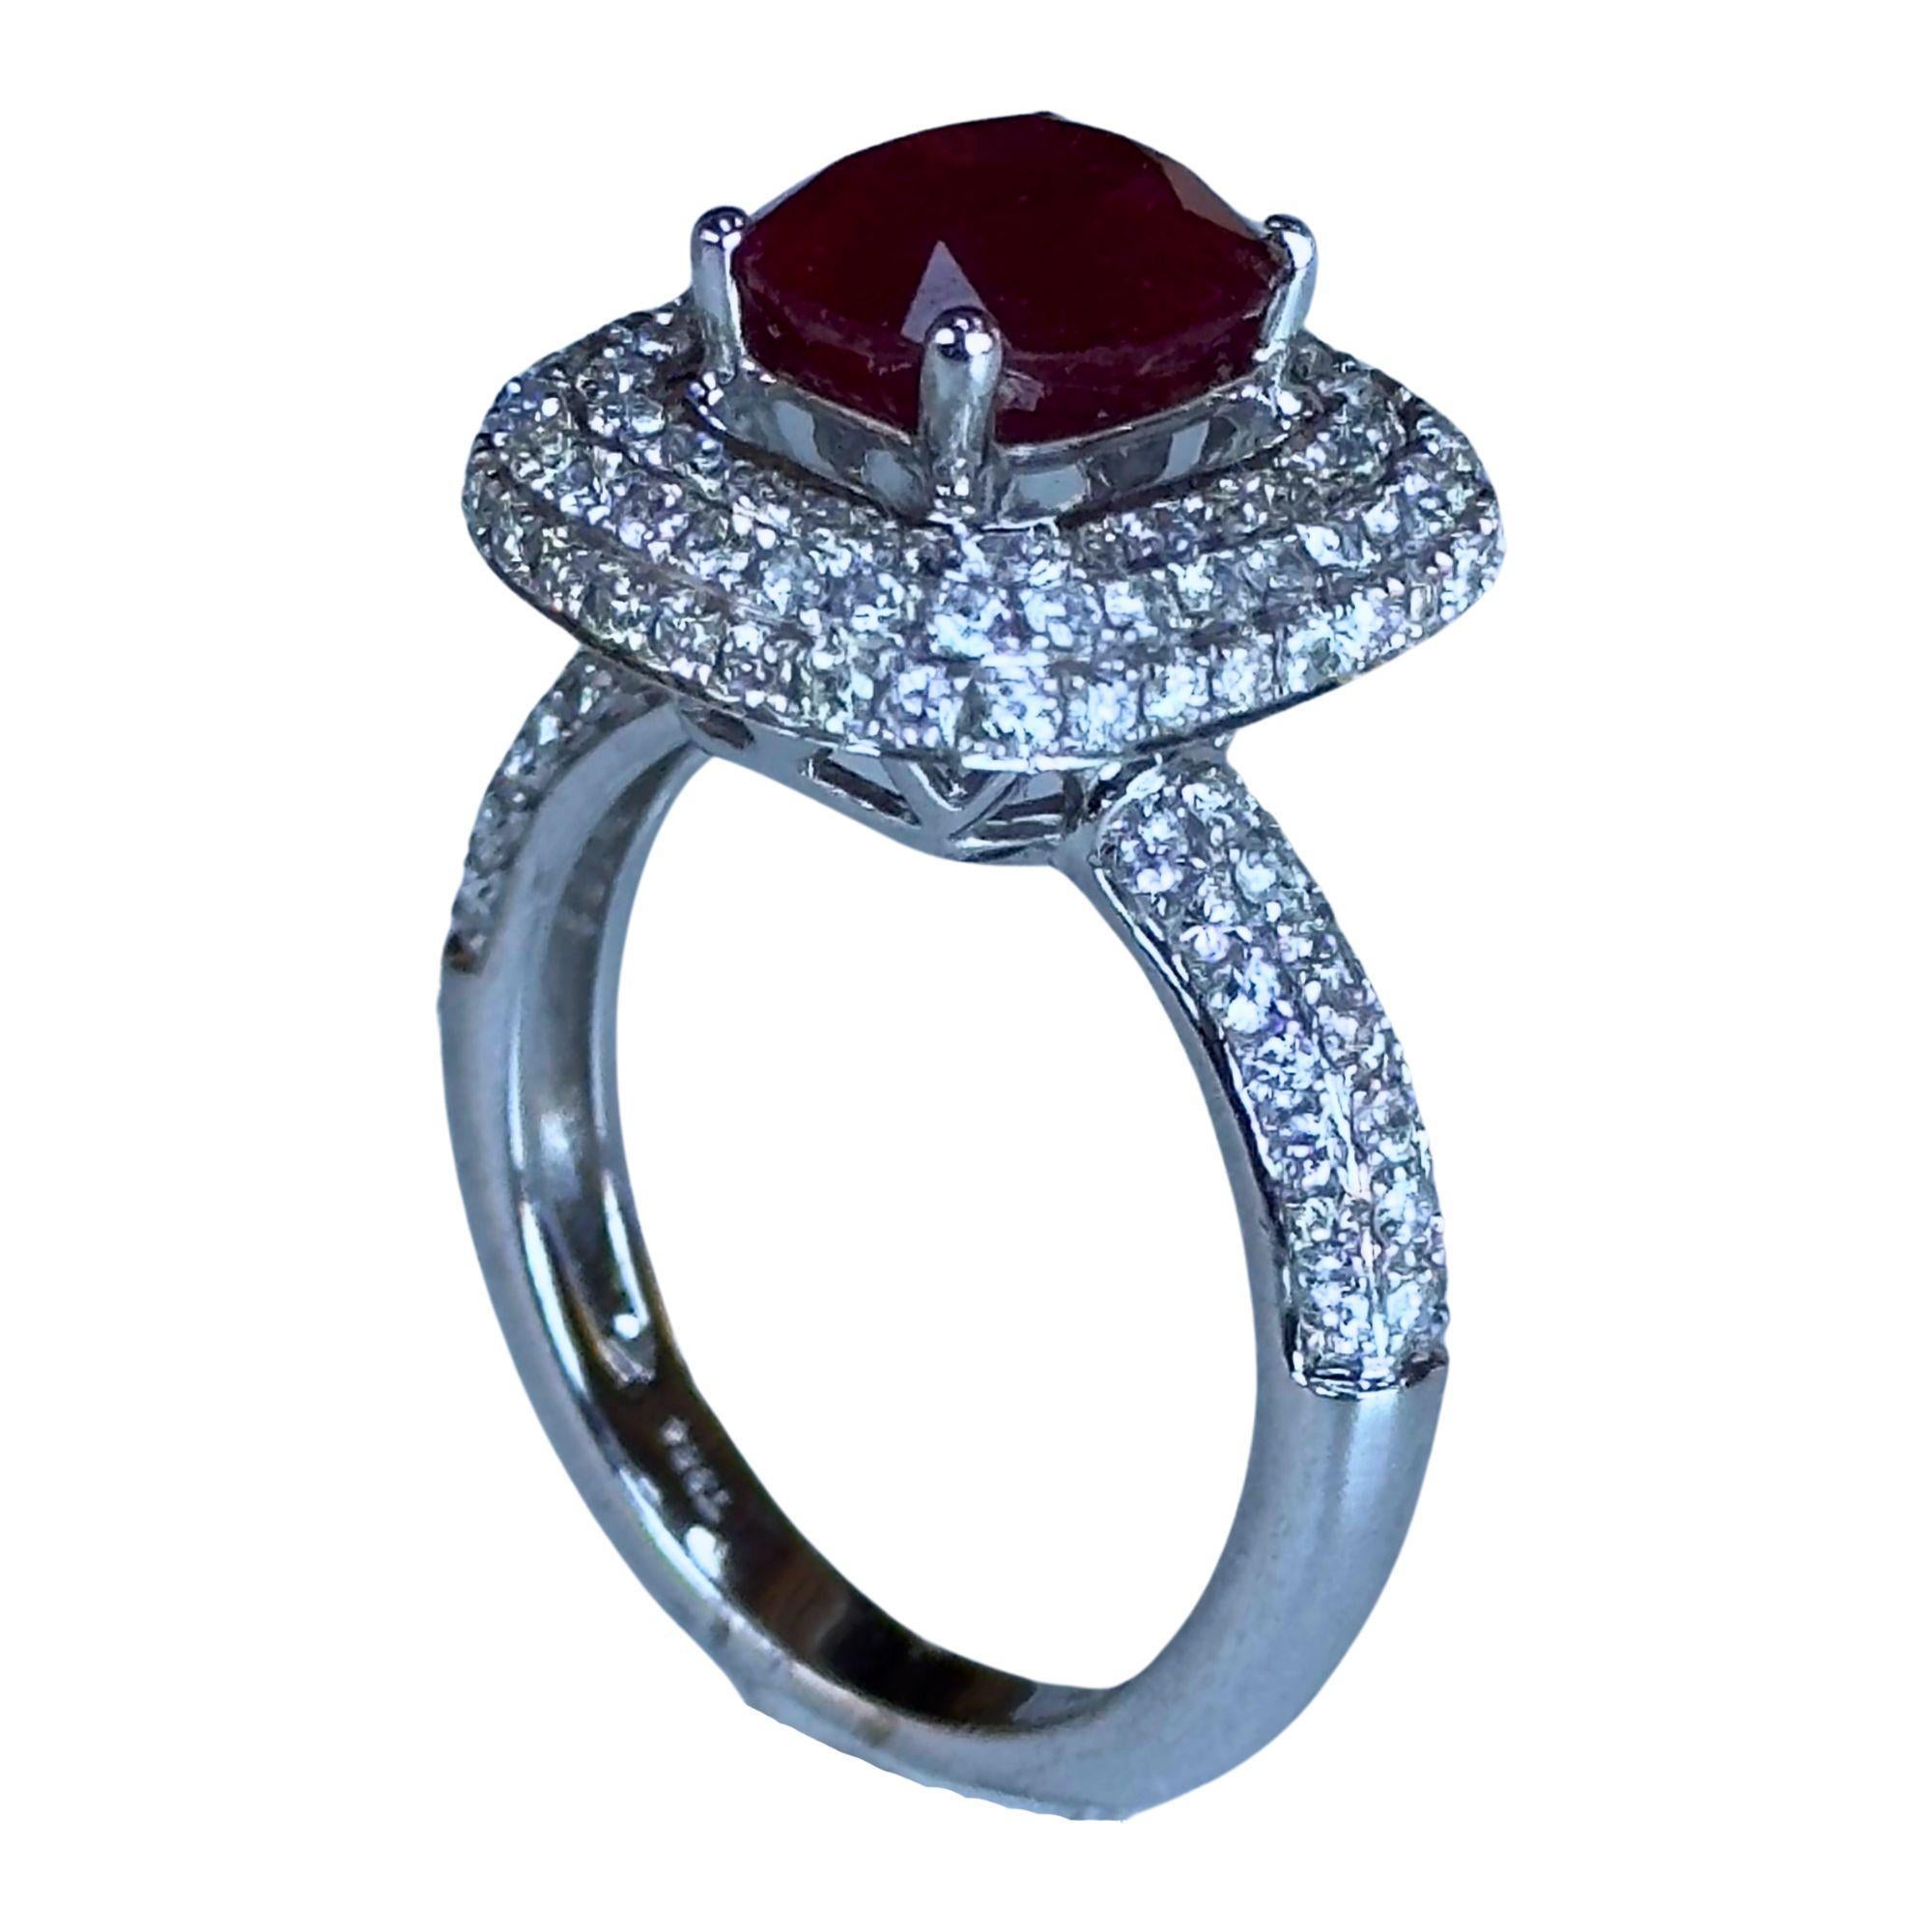 This elegant 18k diamond and ruby ring showcases a total of 1.06 carats of diamonds and 3.19 carats of rubies in a stunning 18k white gold setting. In good condition with minor surface wear, this 7.6 gram ring is marked with 